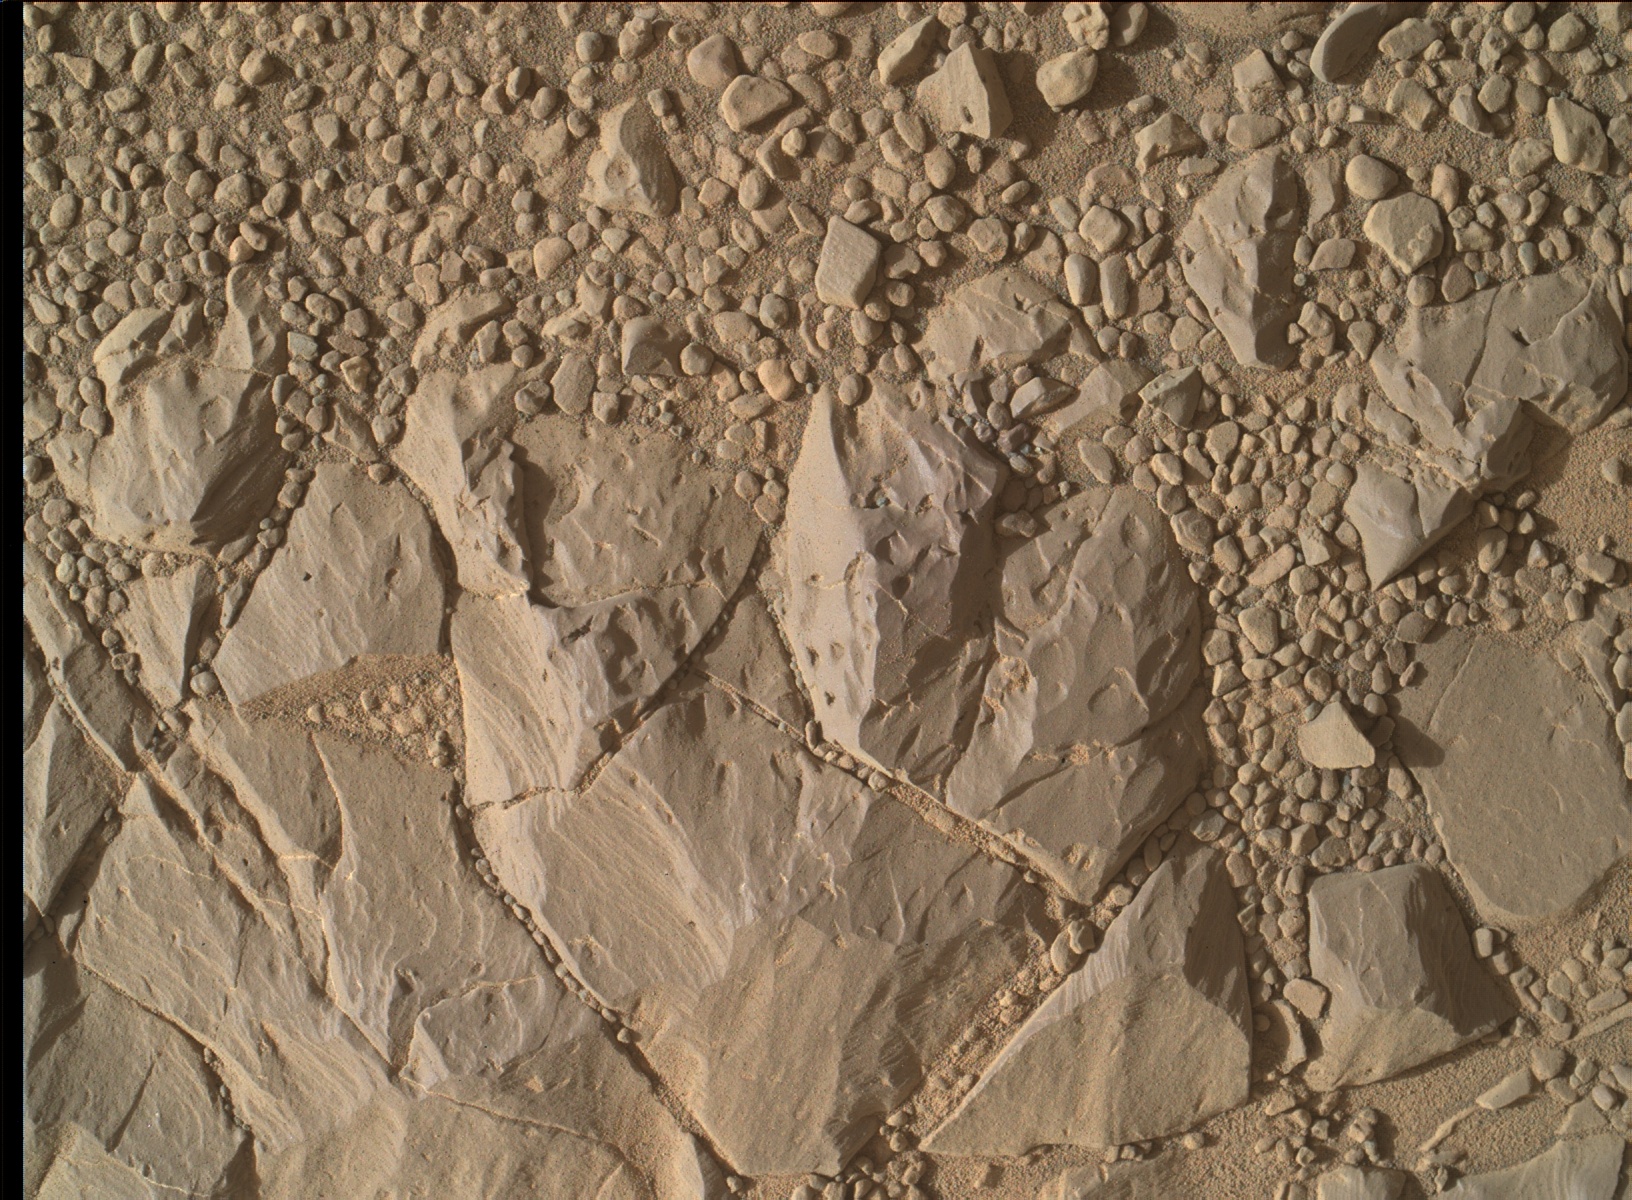 Nasa's Mars rover Curiosity acquired this image using its Mars Hand Lens Imager (MAHLI) on Sol 1895